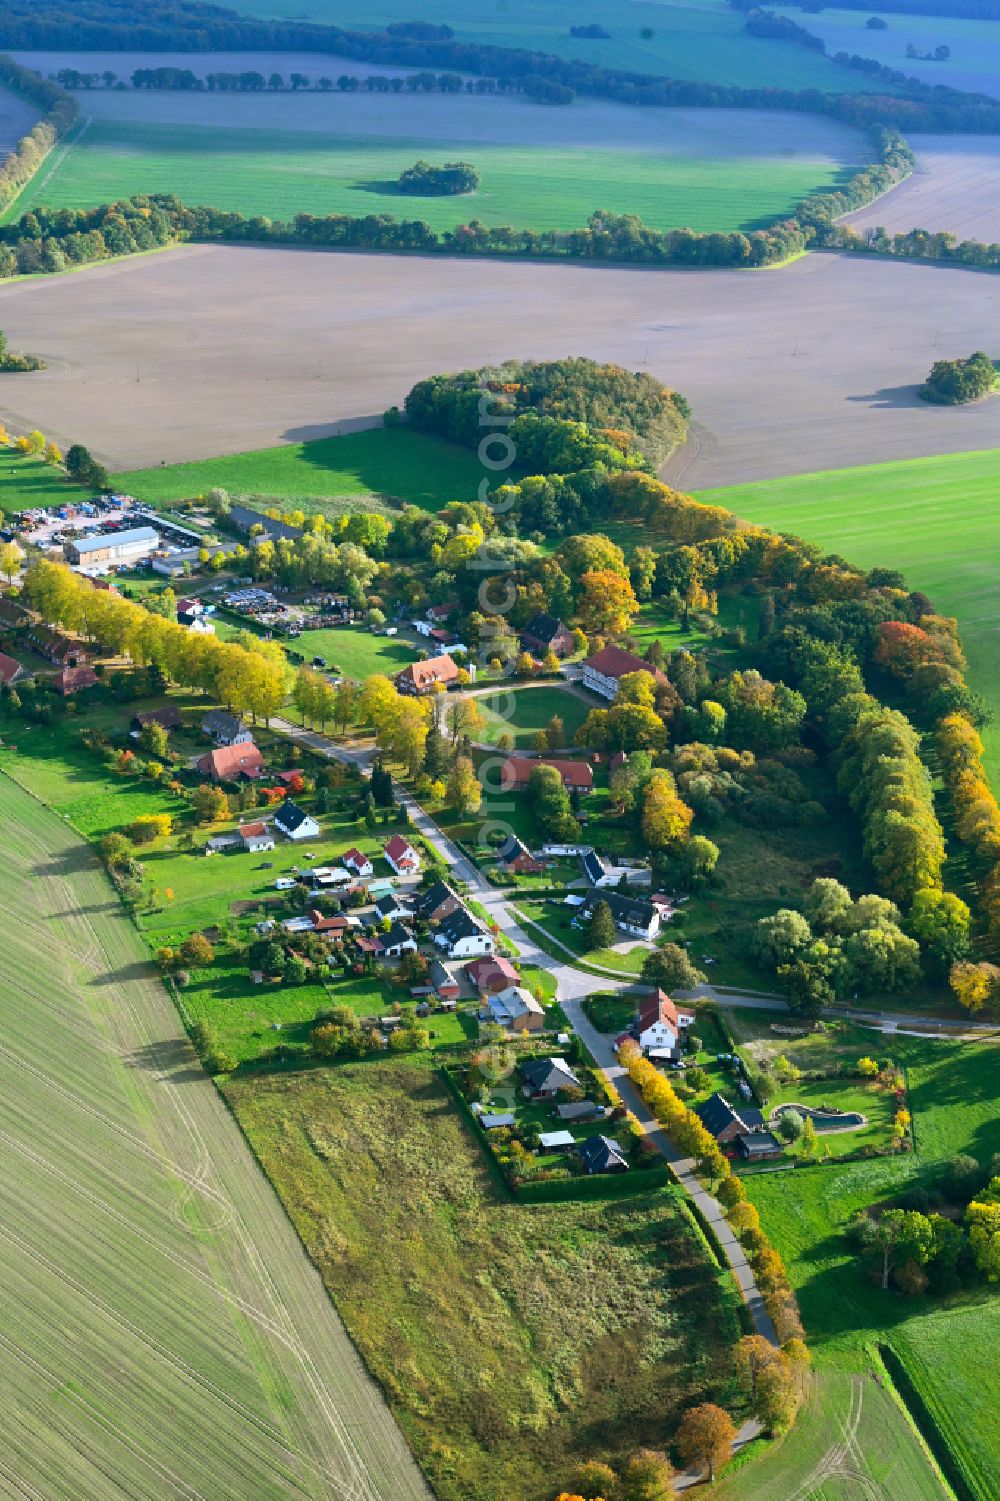 Aerial image Körchow - Agricultural land and field boundaries surround the settlement area of the village in Koerchow in the state Mecklenburg - Western Pomerania, Germany